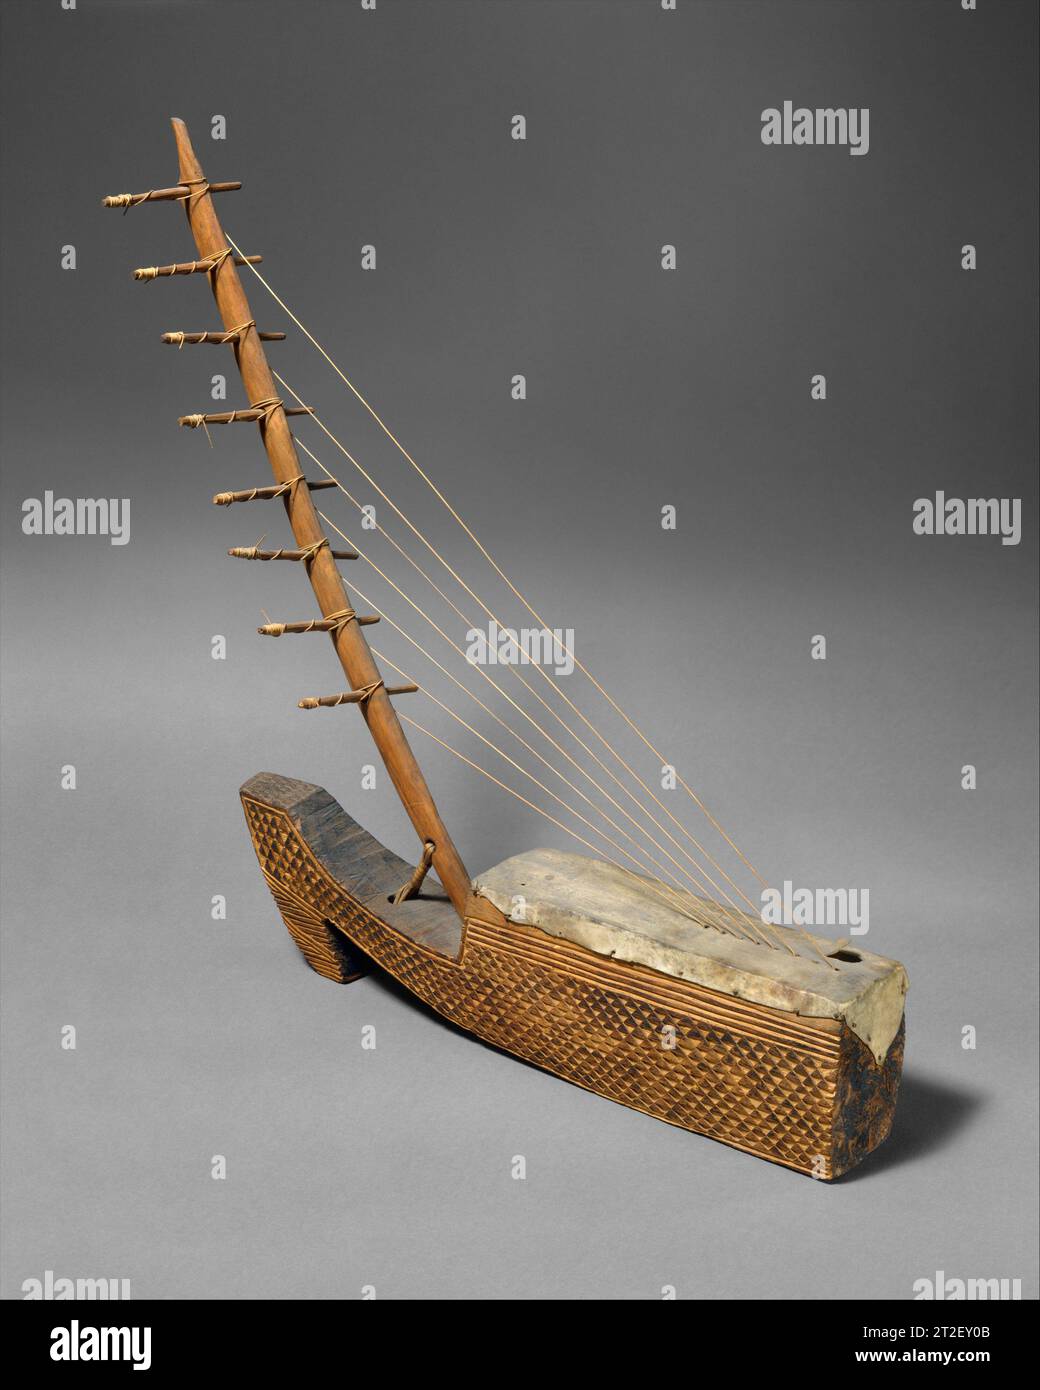 Ngombi (arched Harp) Fang/Kele people 19th century Ngombi (ombi) with fiber strings.Unlike the triangular European harp, the arched harp consists of two elements, a soundbox with a curved neck rising from it. Strings made of gut or plant fiber rise diagonally from the soundtable. Stock Photo